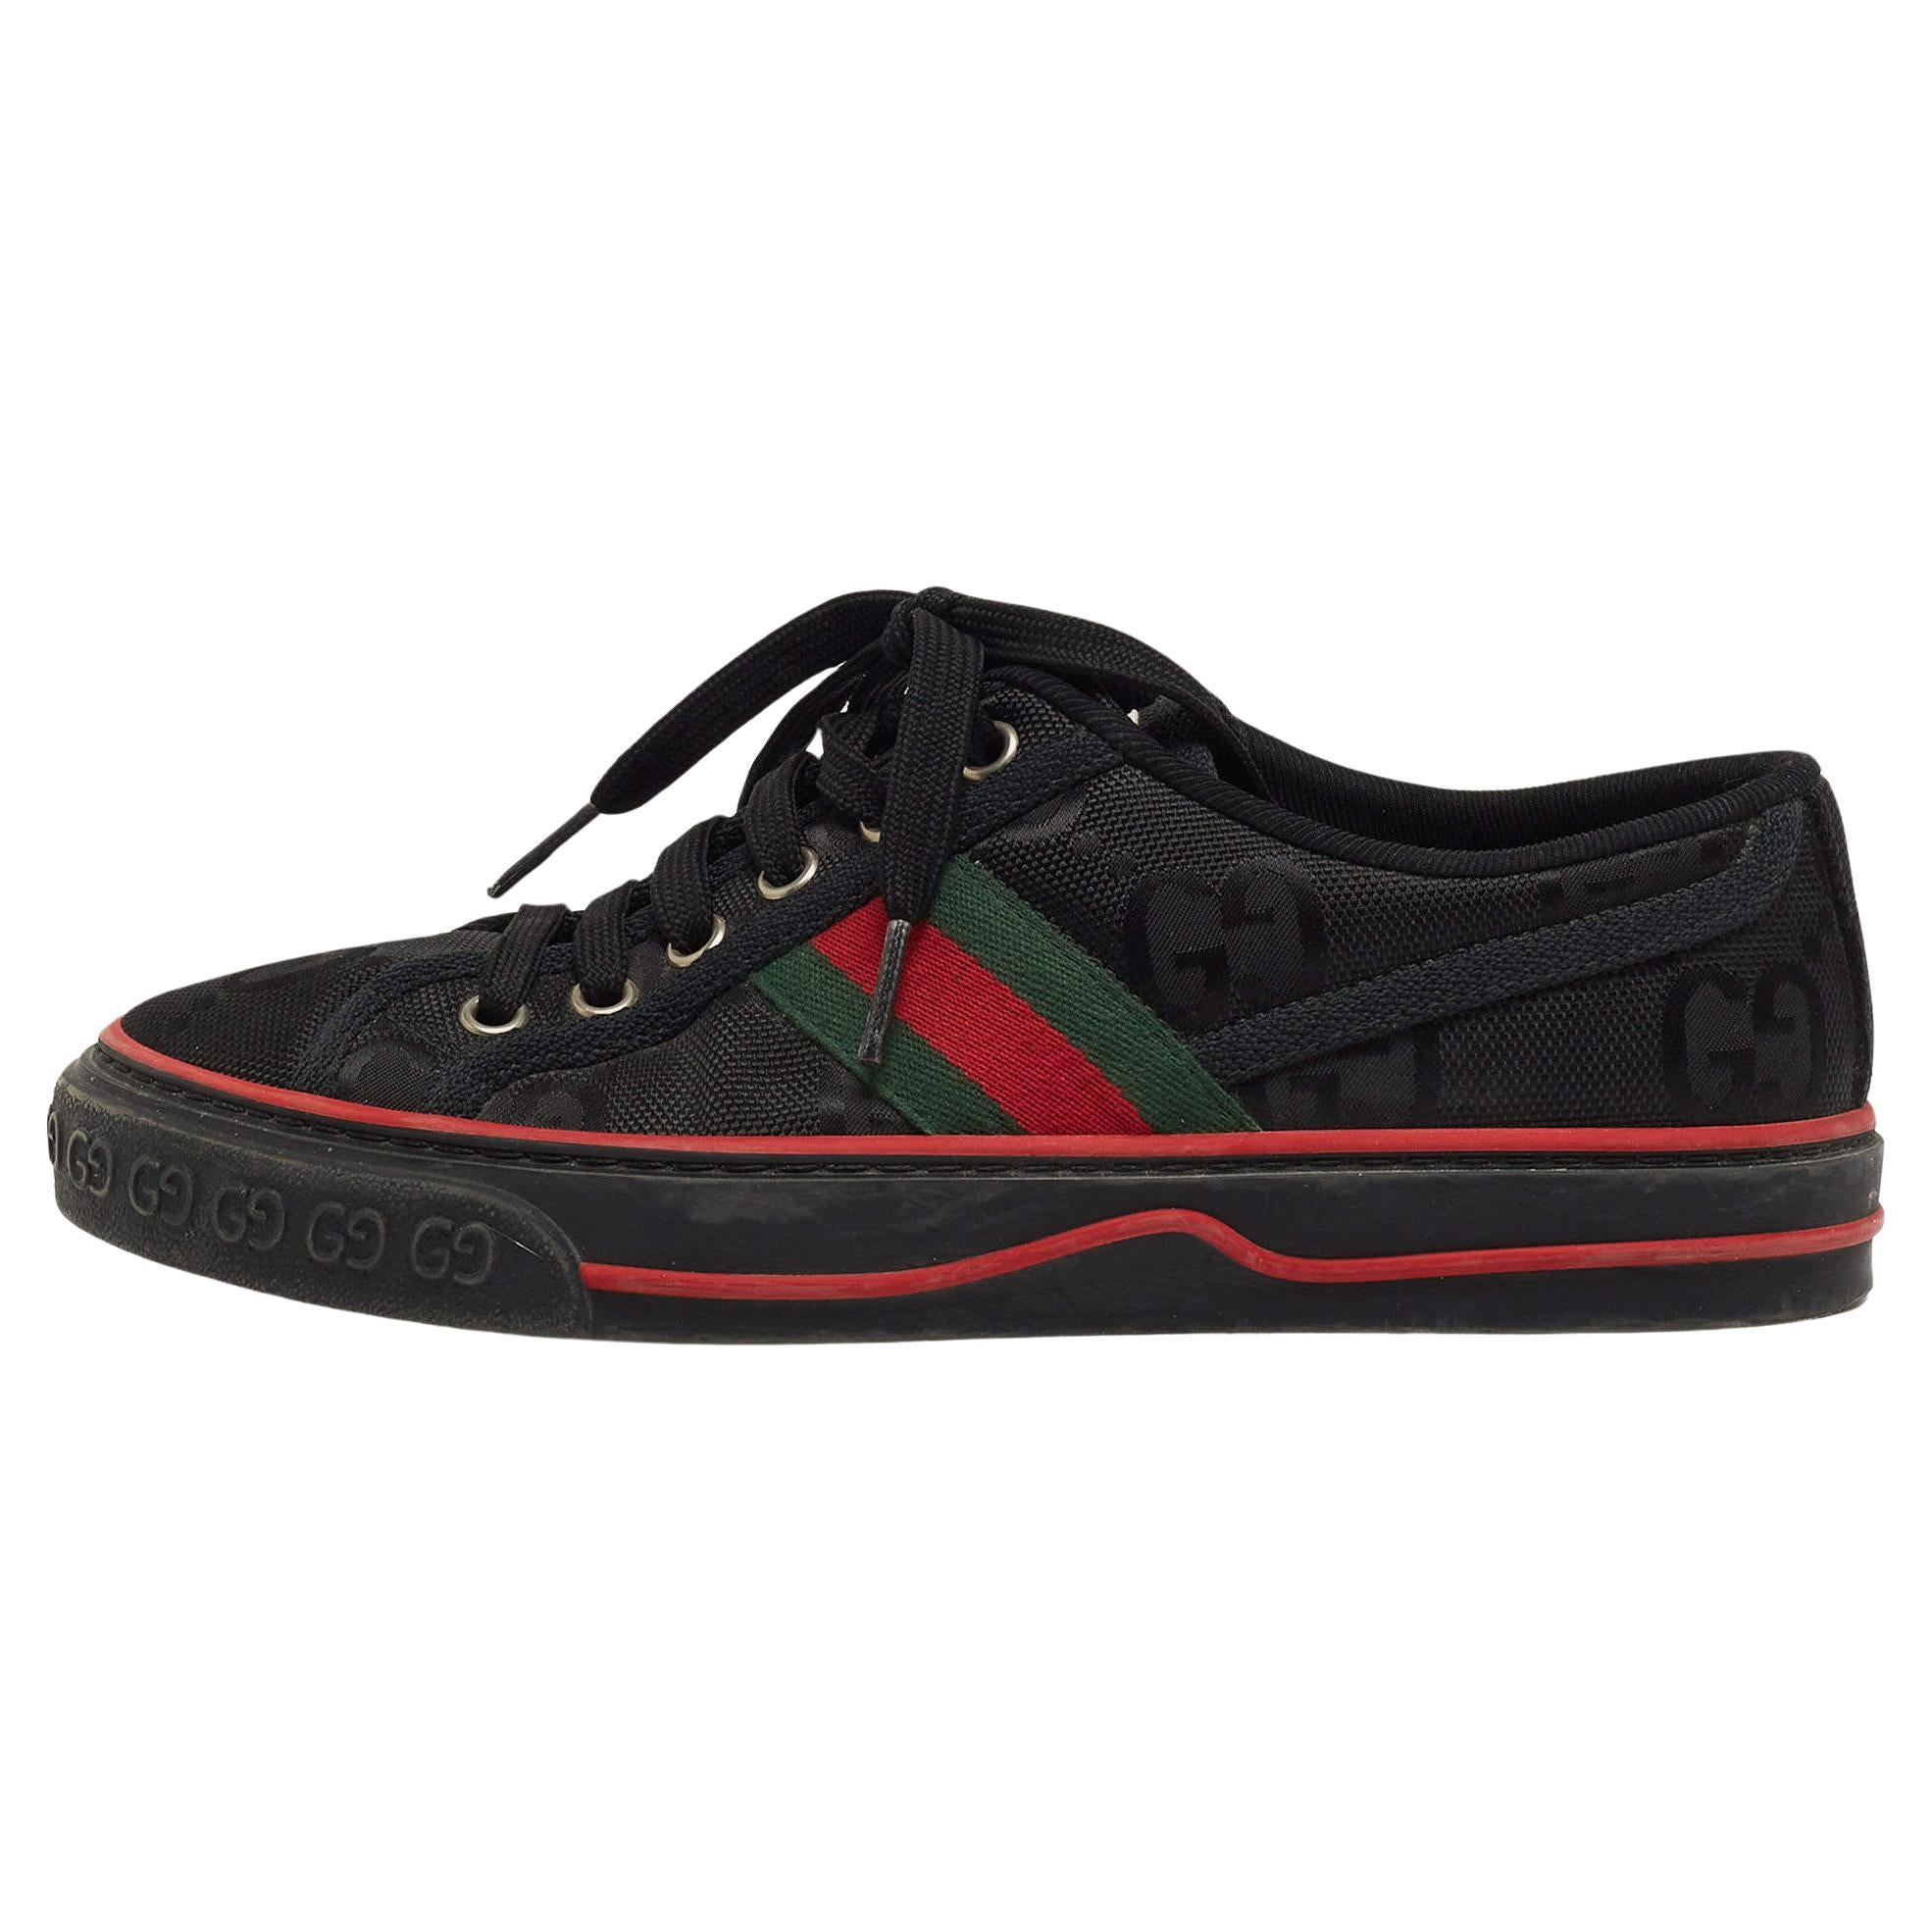 Gucci Black GG Canvas Tennis 1977 Sneakers Size 36 For Sale